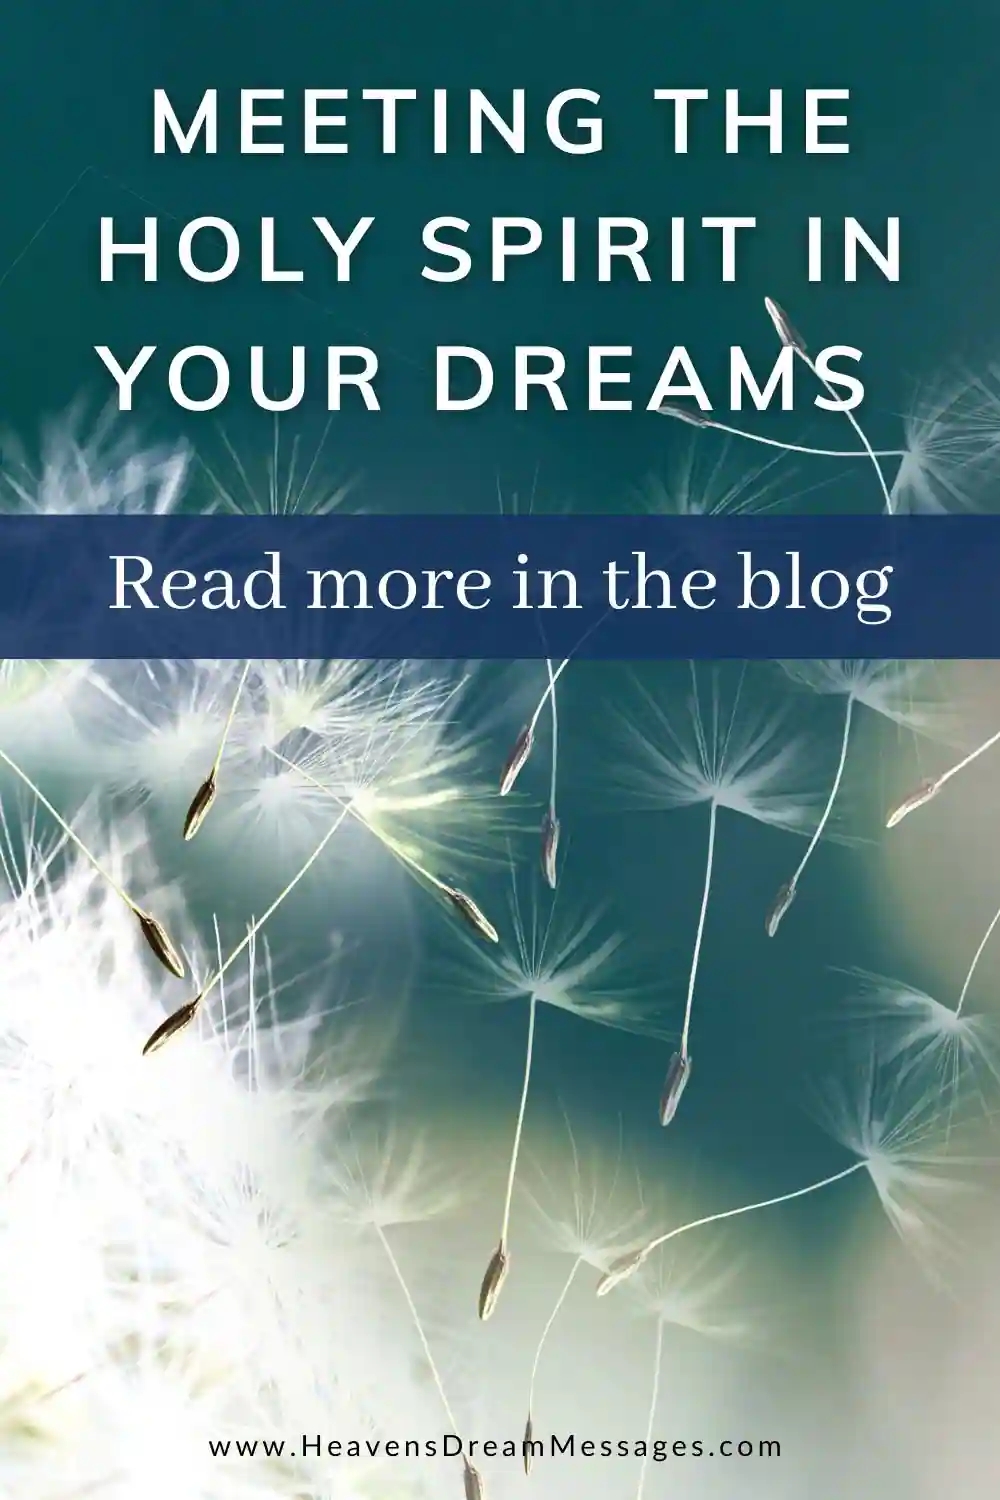 Picture of dandelion seeds, with text: meeting the Holy Spirit in your dreams